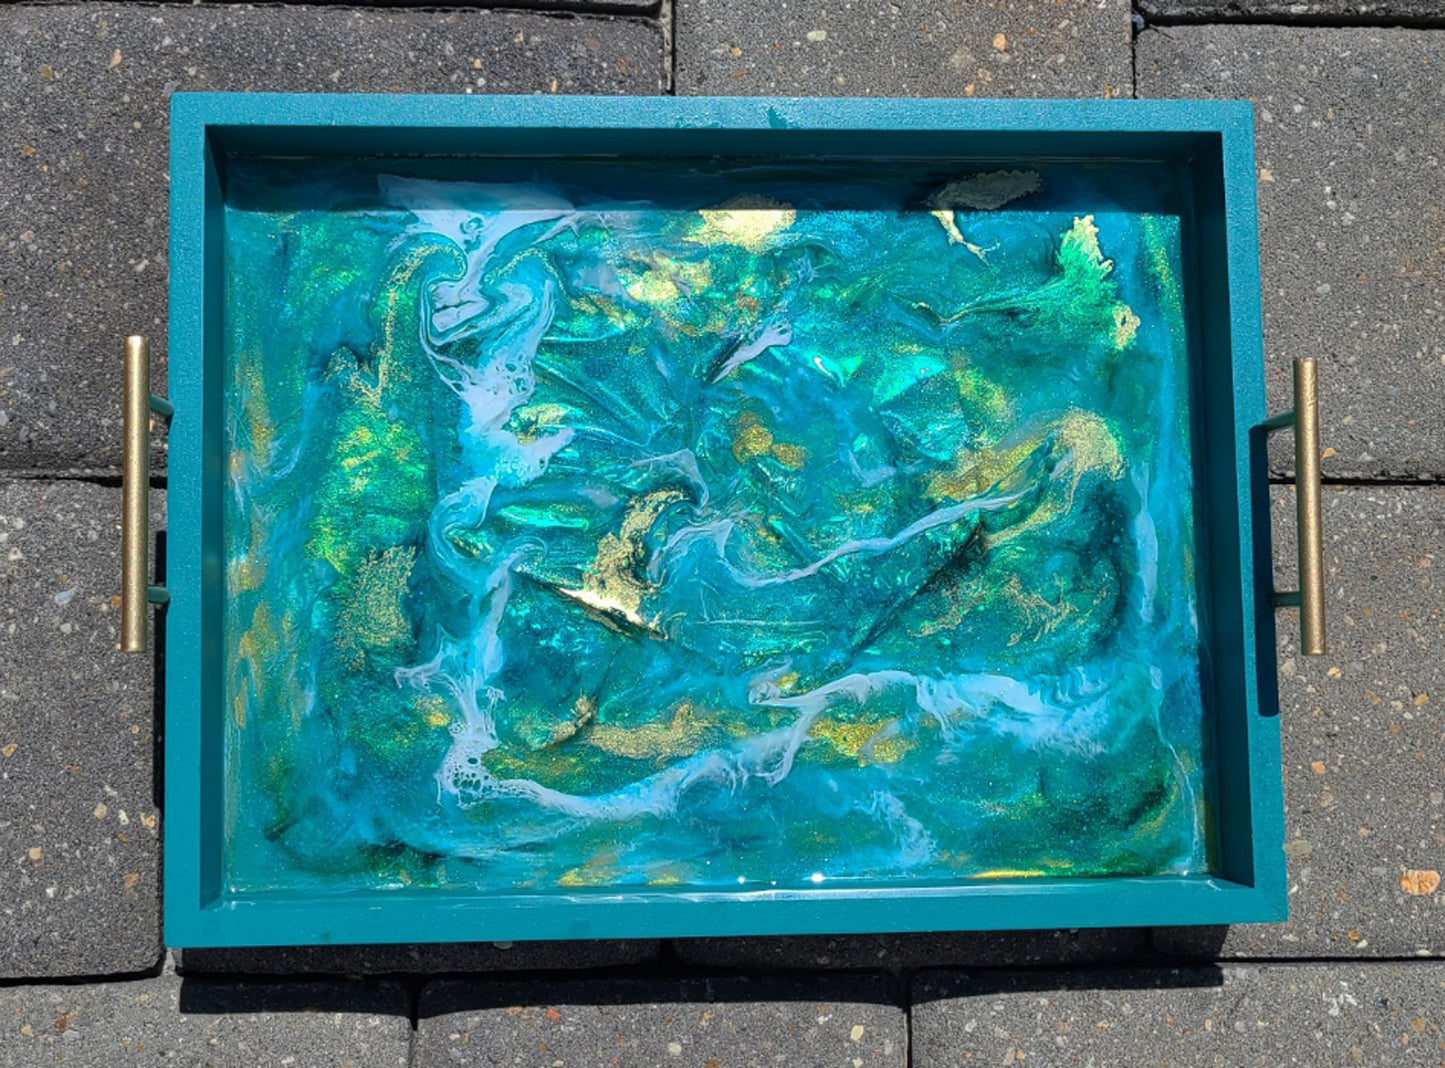 Turquoise and Gold Tray with Turbulent Resin Water Scene